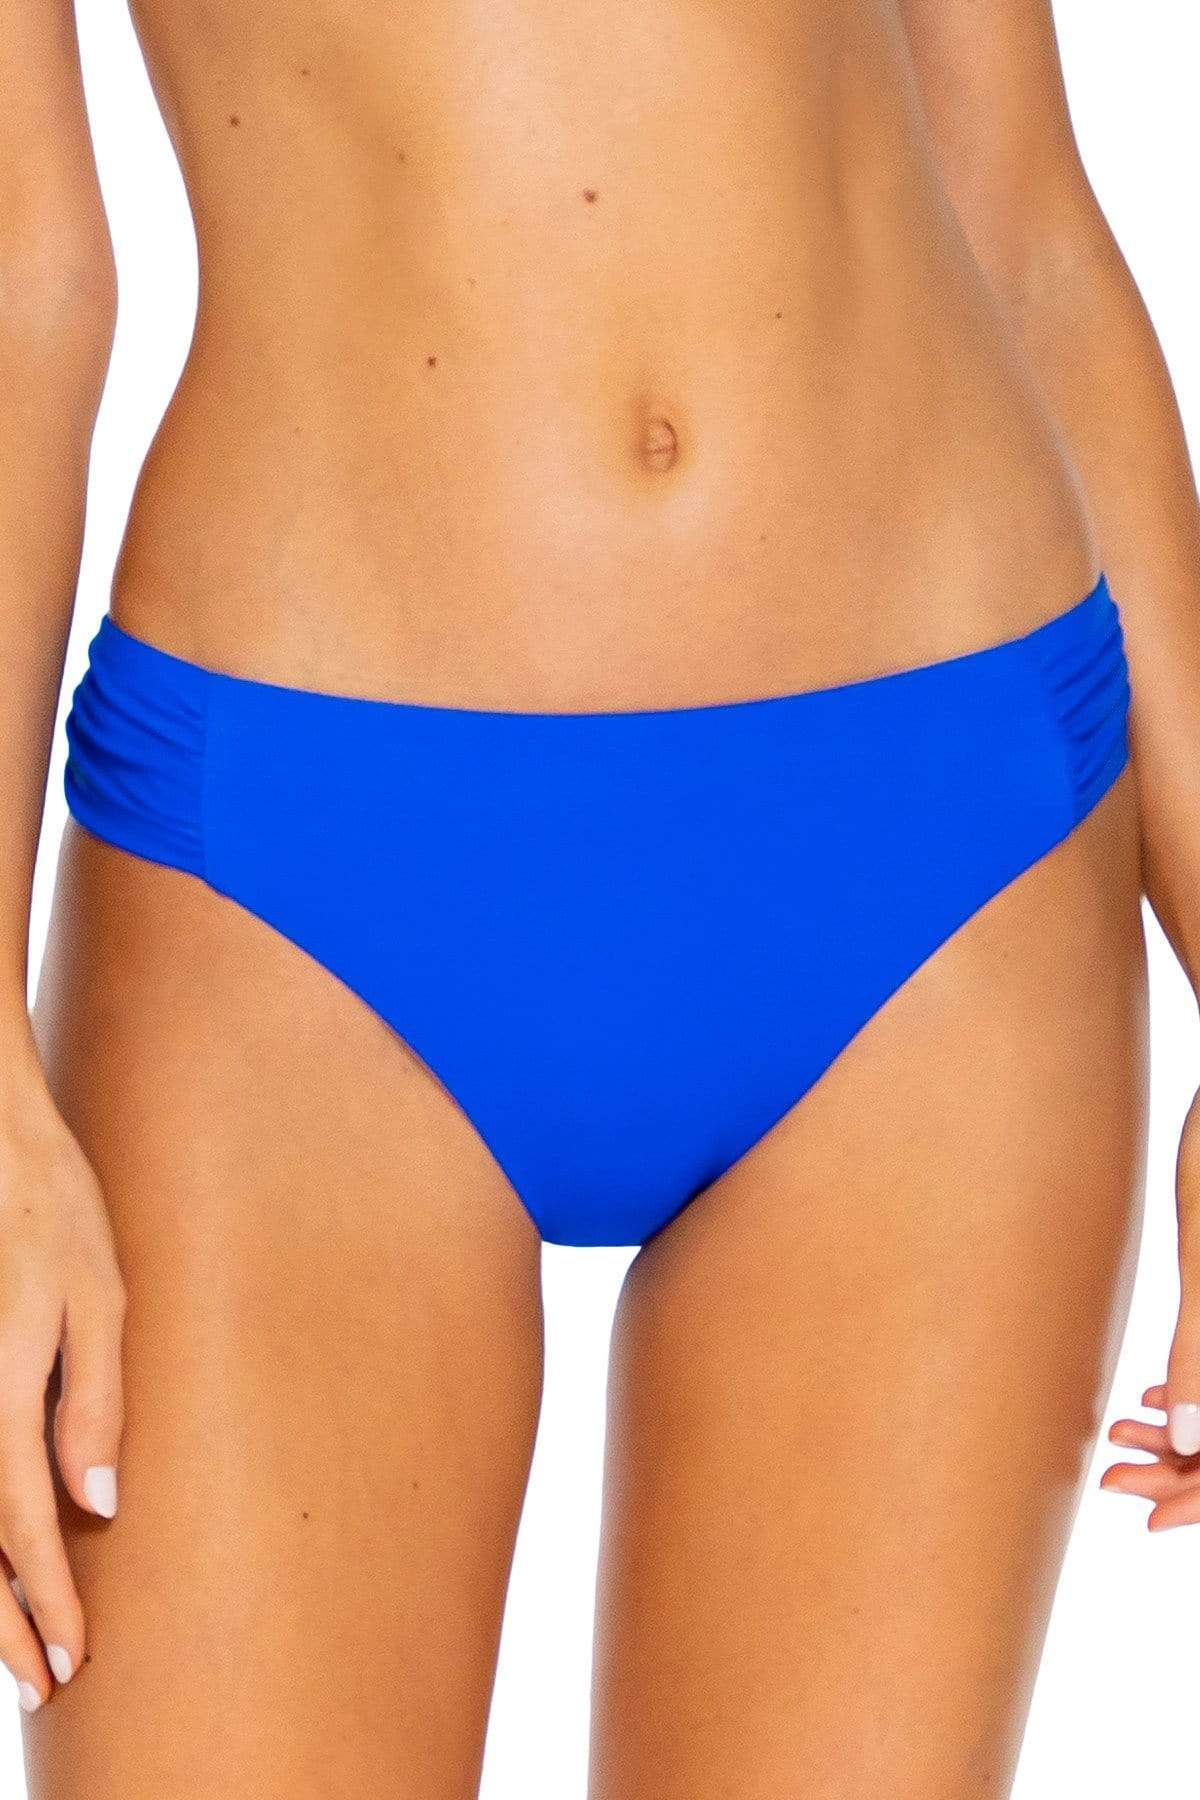 Bestswimwear -  Sunsets Imperial Blue Femme Fatale Hipster